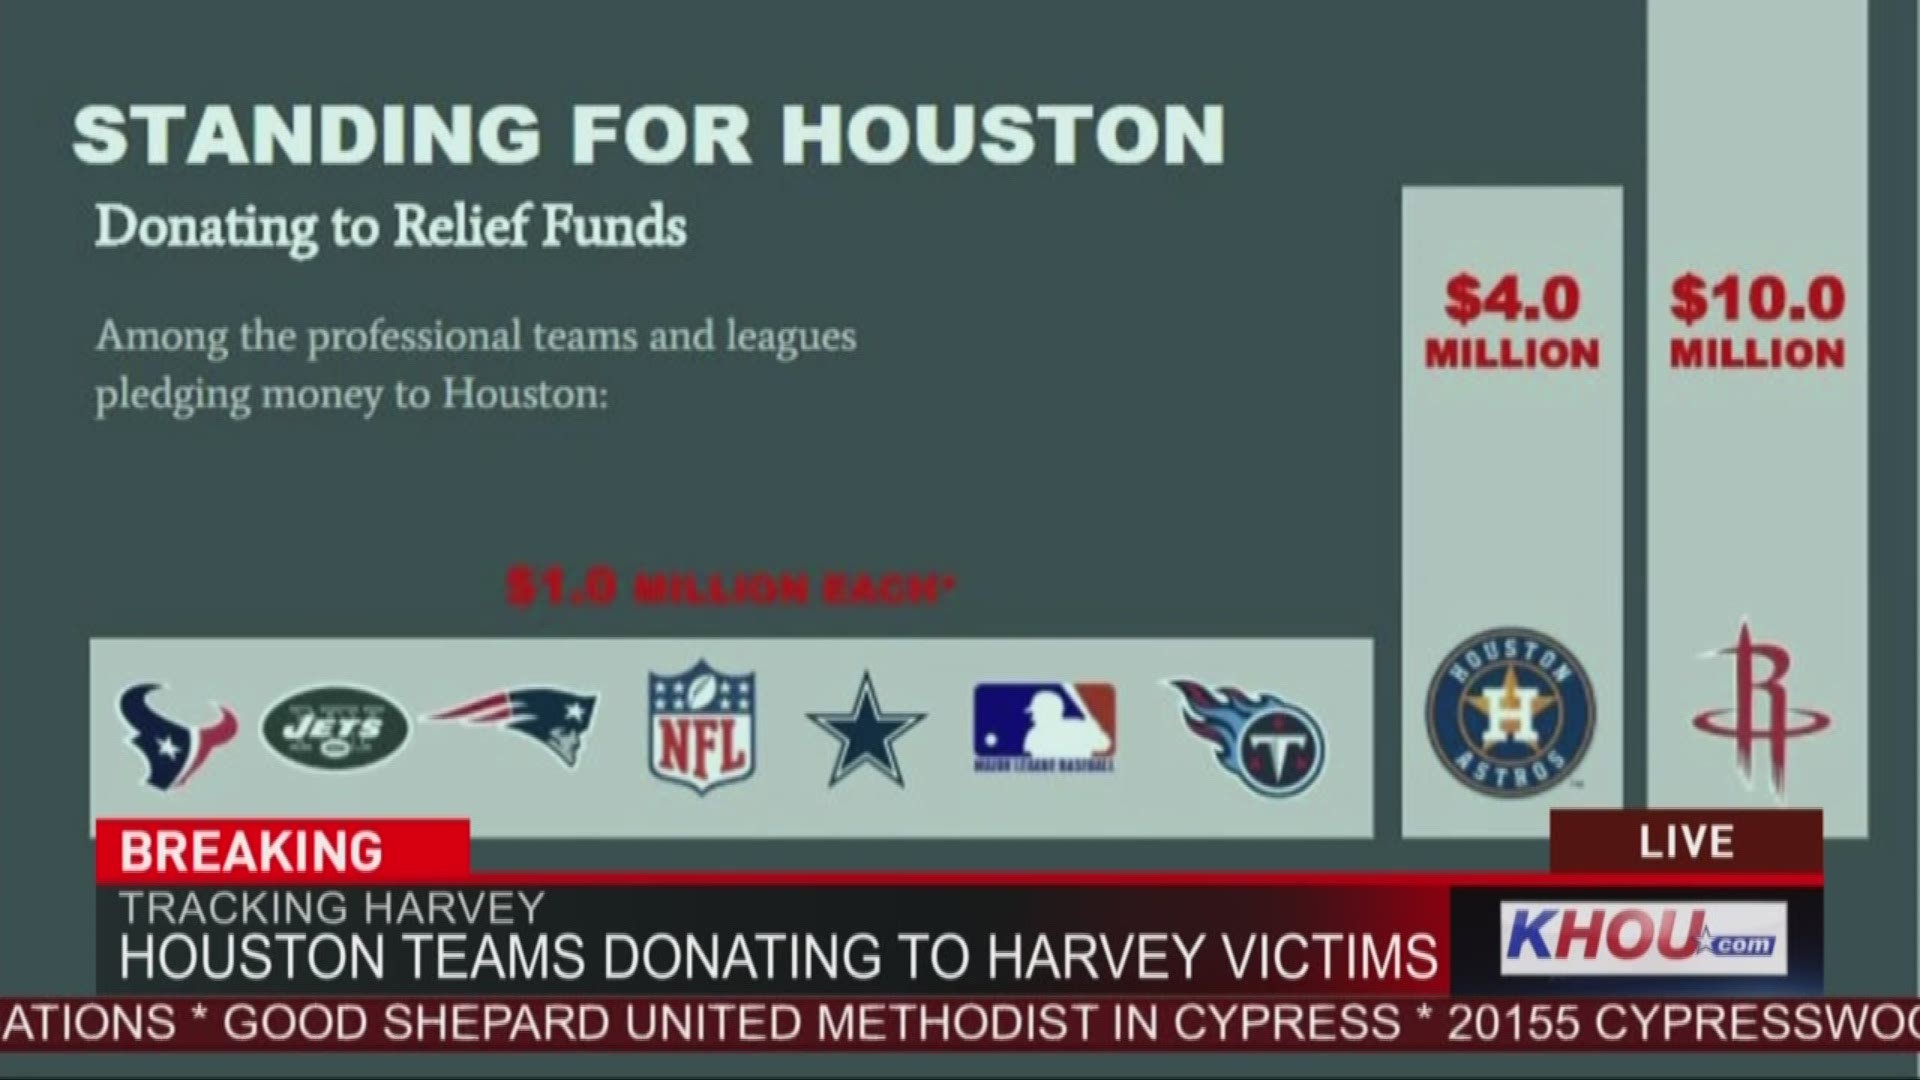 Sports teams, organizations and players are showing their support for Houstonians and donating big money to the recovery effort. 8/29 10:15 p.m.